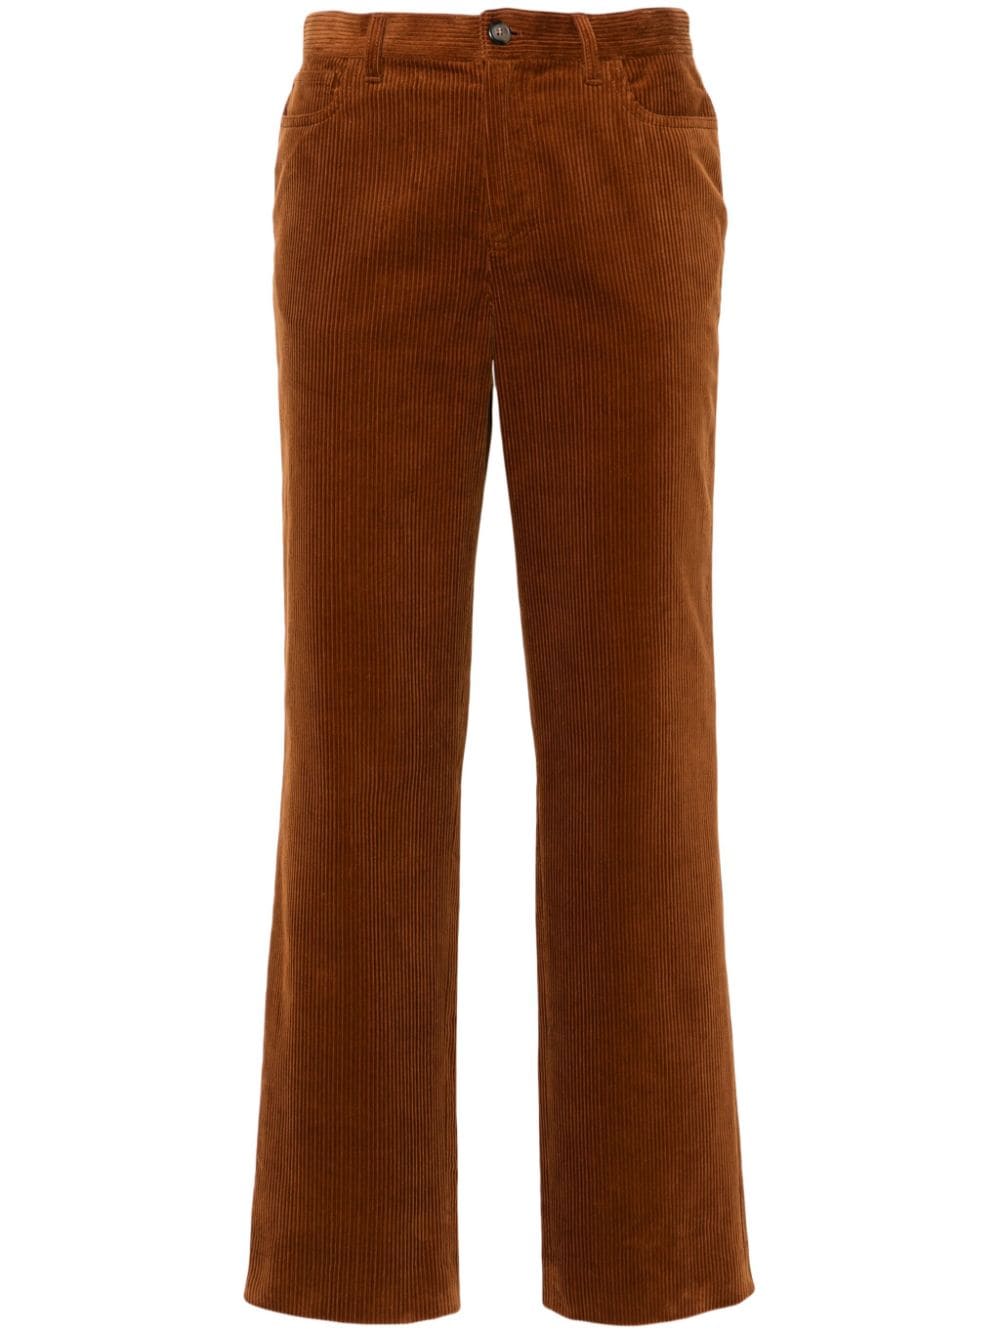 Apc New Sailor Corduroy Trousers In Brown